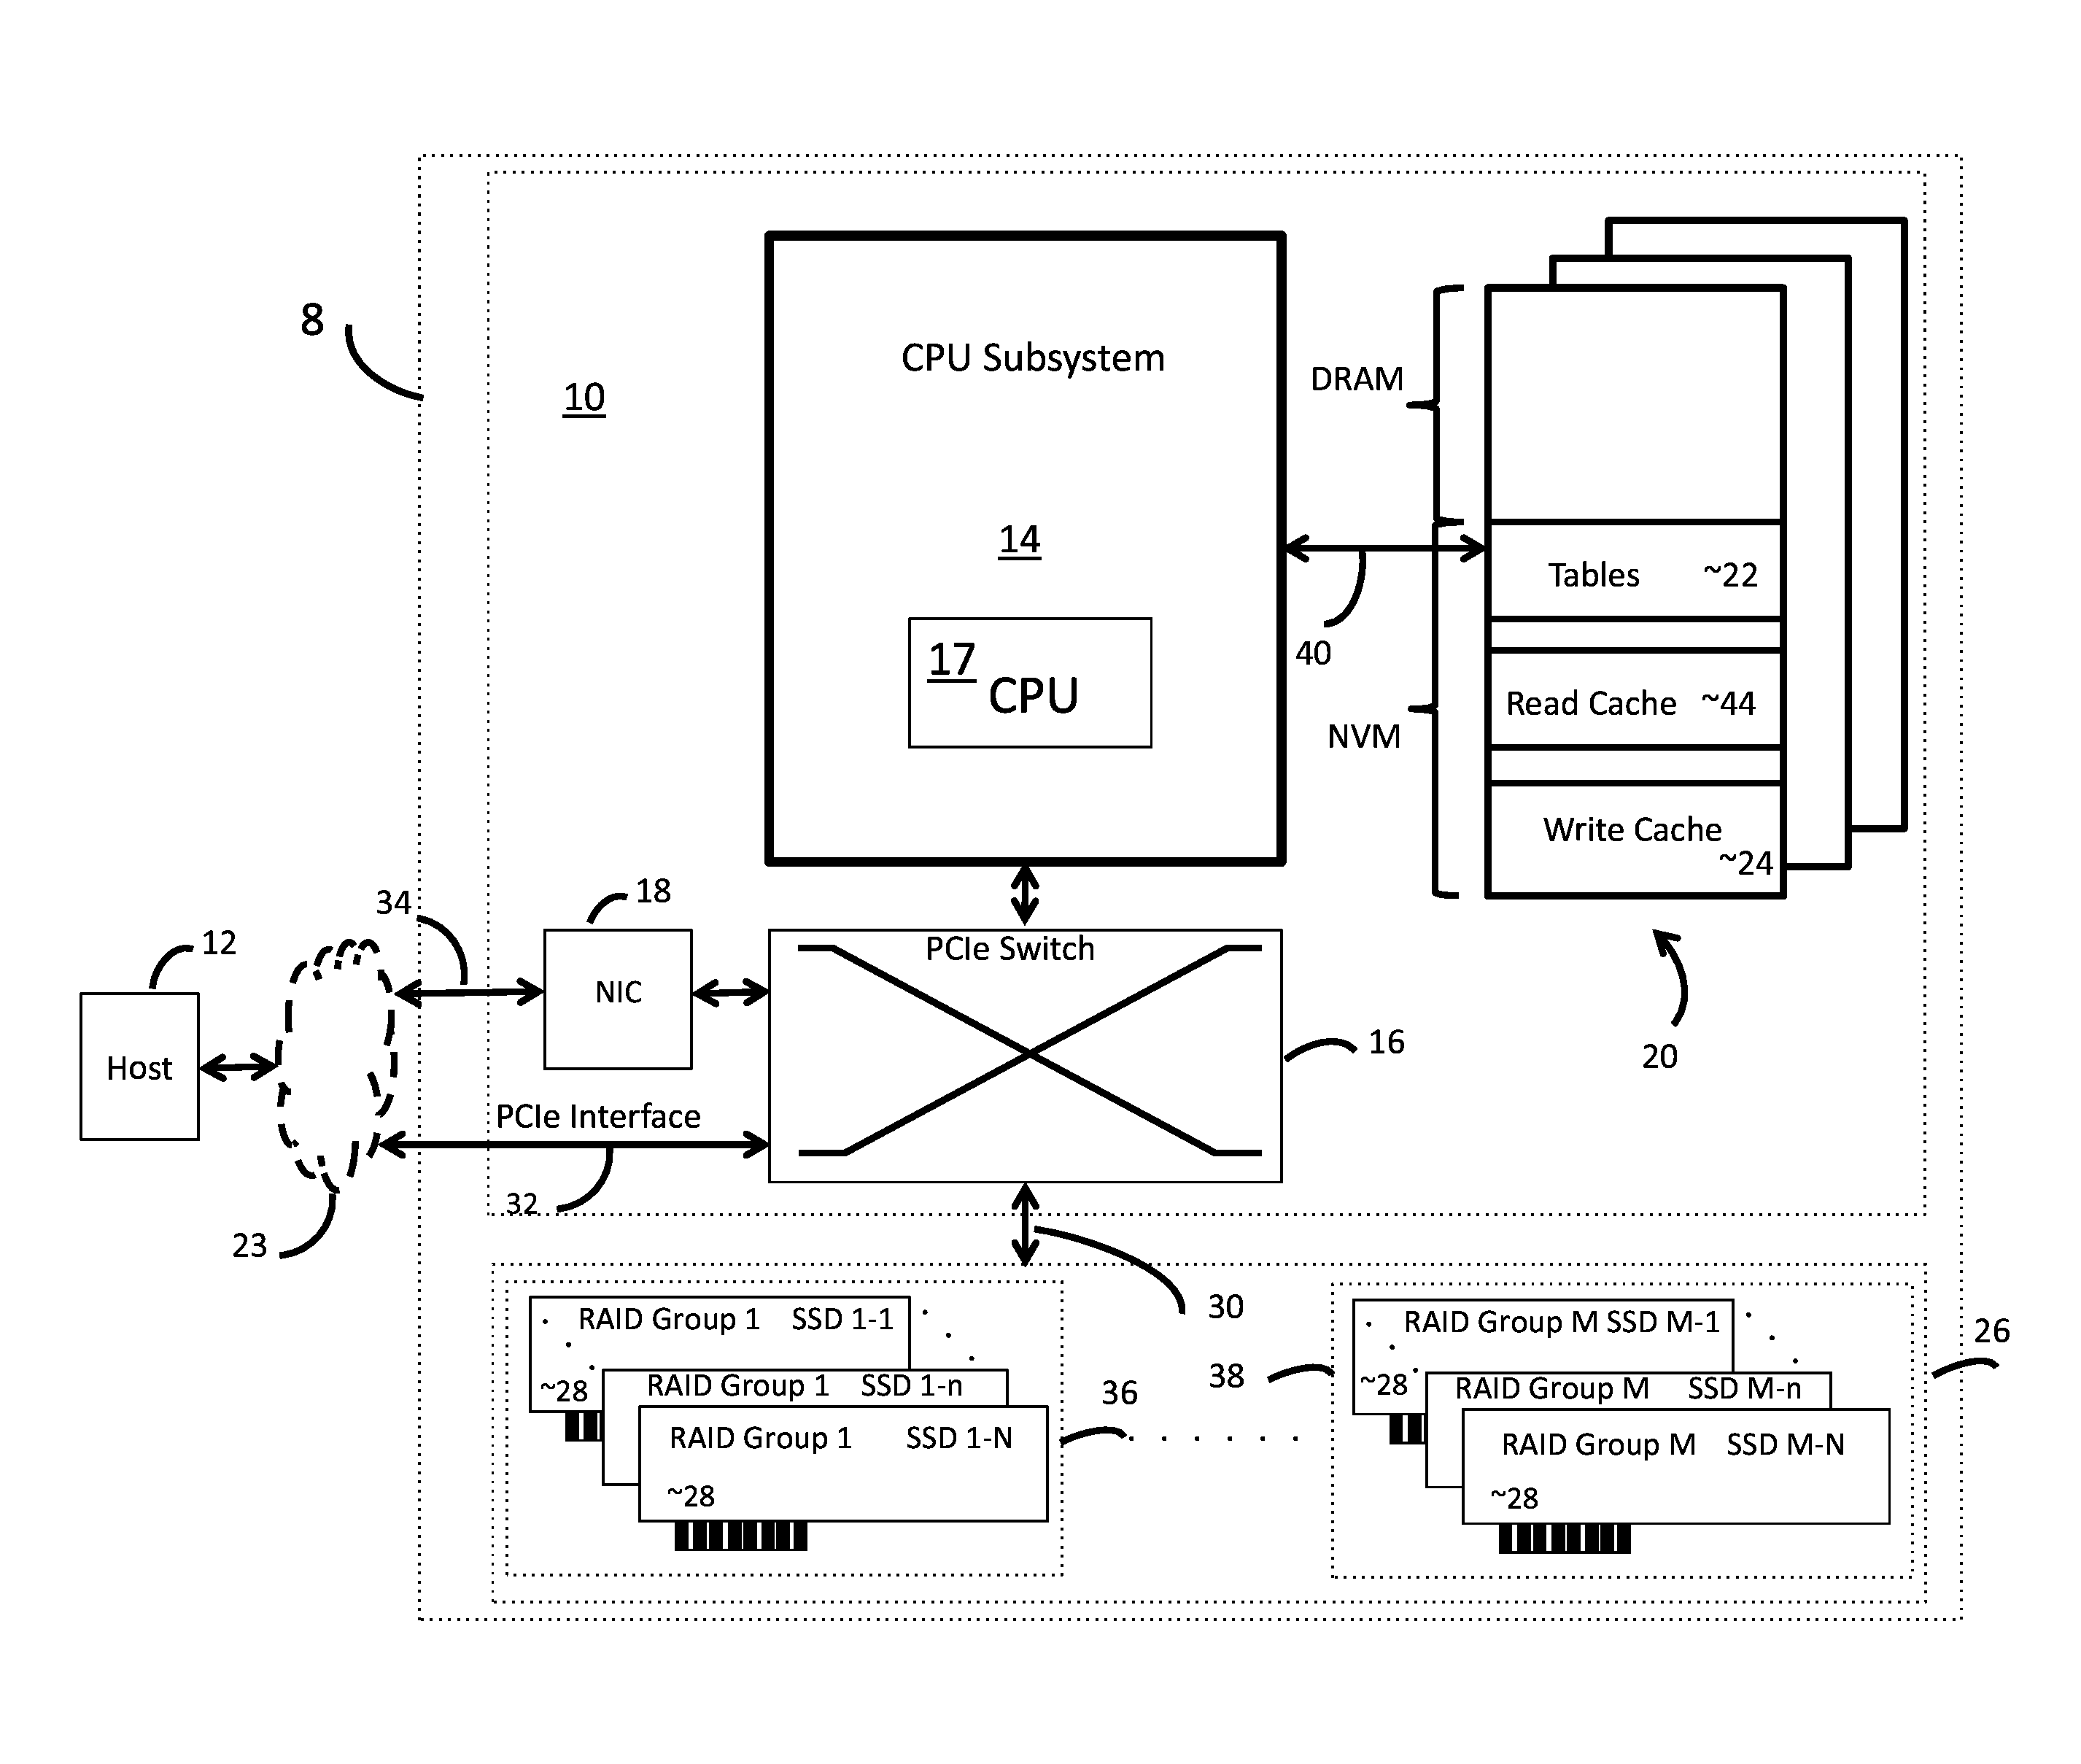 METHOD AND APPARATUS FOR DE-DUPLICATION FOR SOLID STATE DISKs (SSDs)